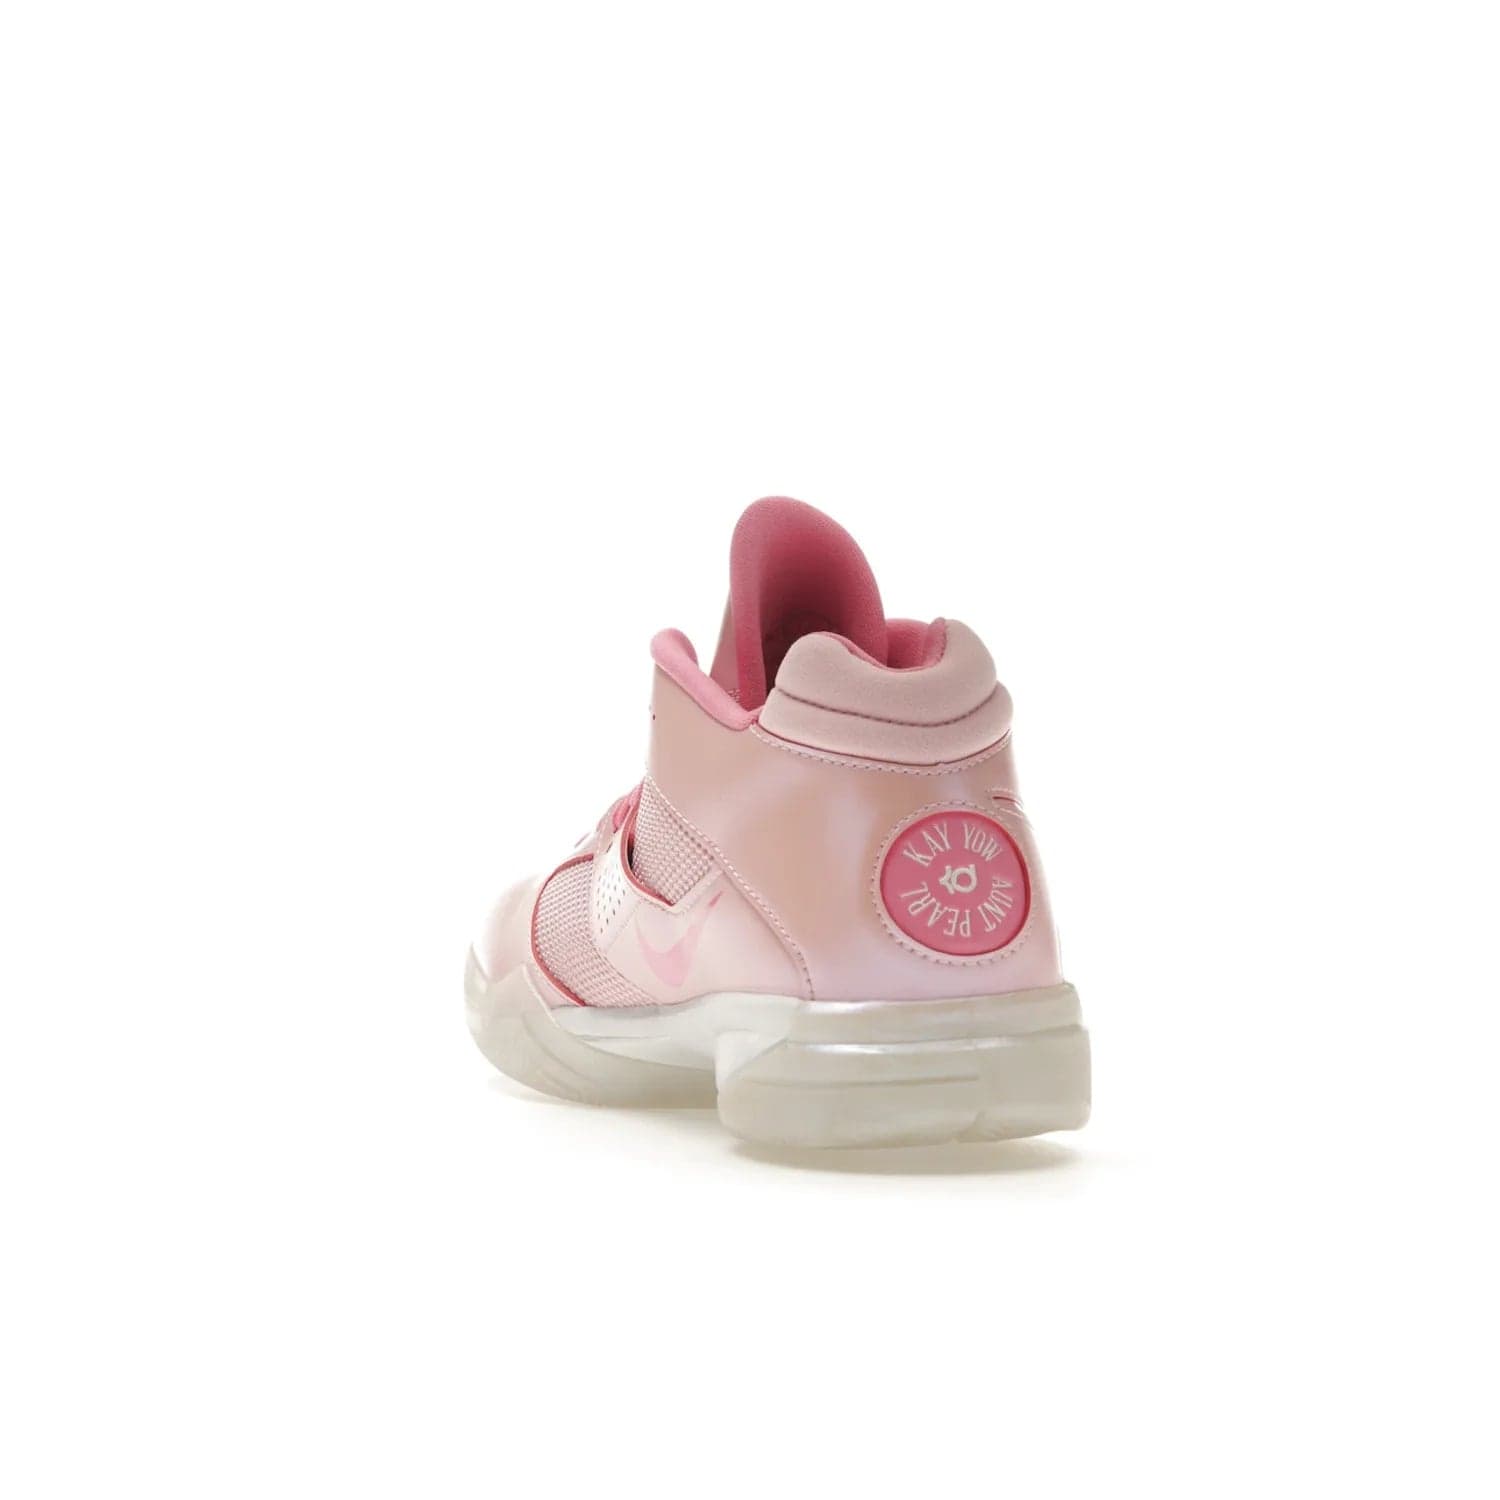 Nike KD 3 Aunt Pearl - Image 26 - Only at www.BallersClubKickz.com - Introducing the Nike KD 3 Aunt Pearl. Featuring a bold Medium Soft Pink, White, & Lotus Pink colorway. Get ready to stand out this October 15th.